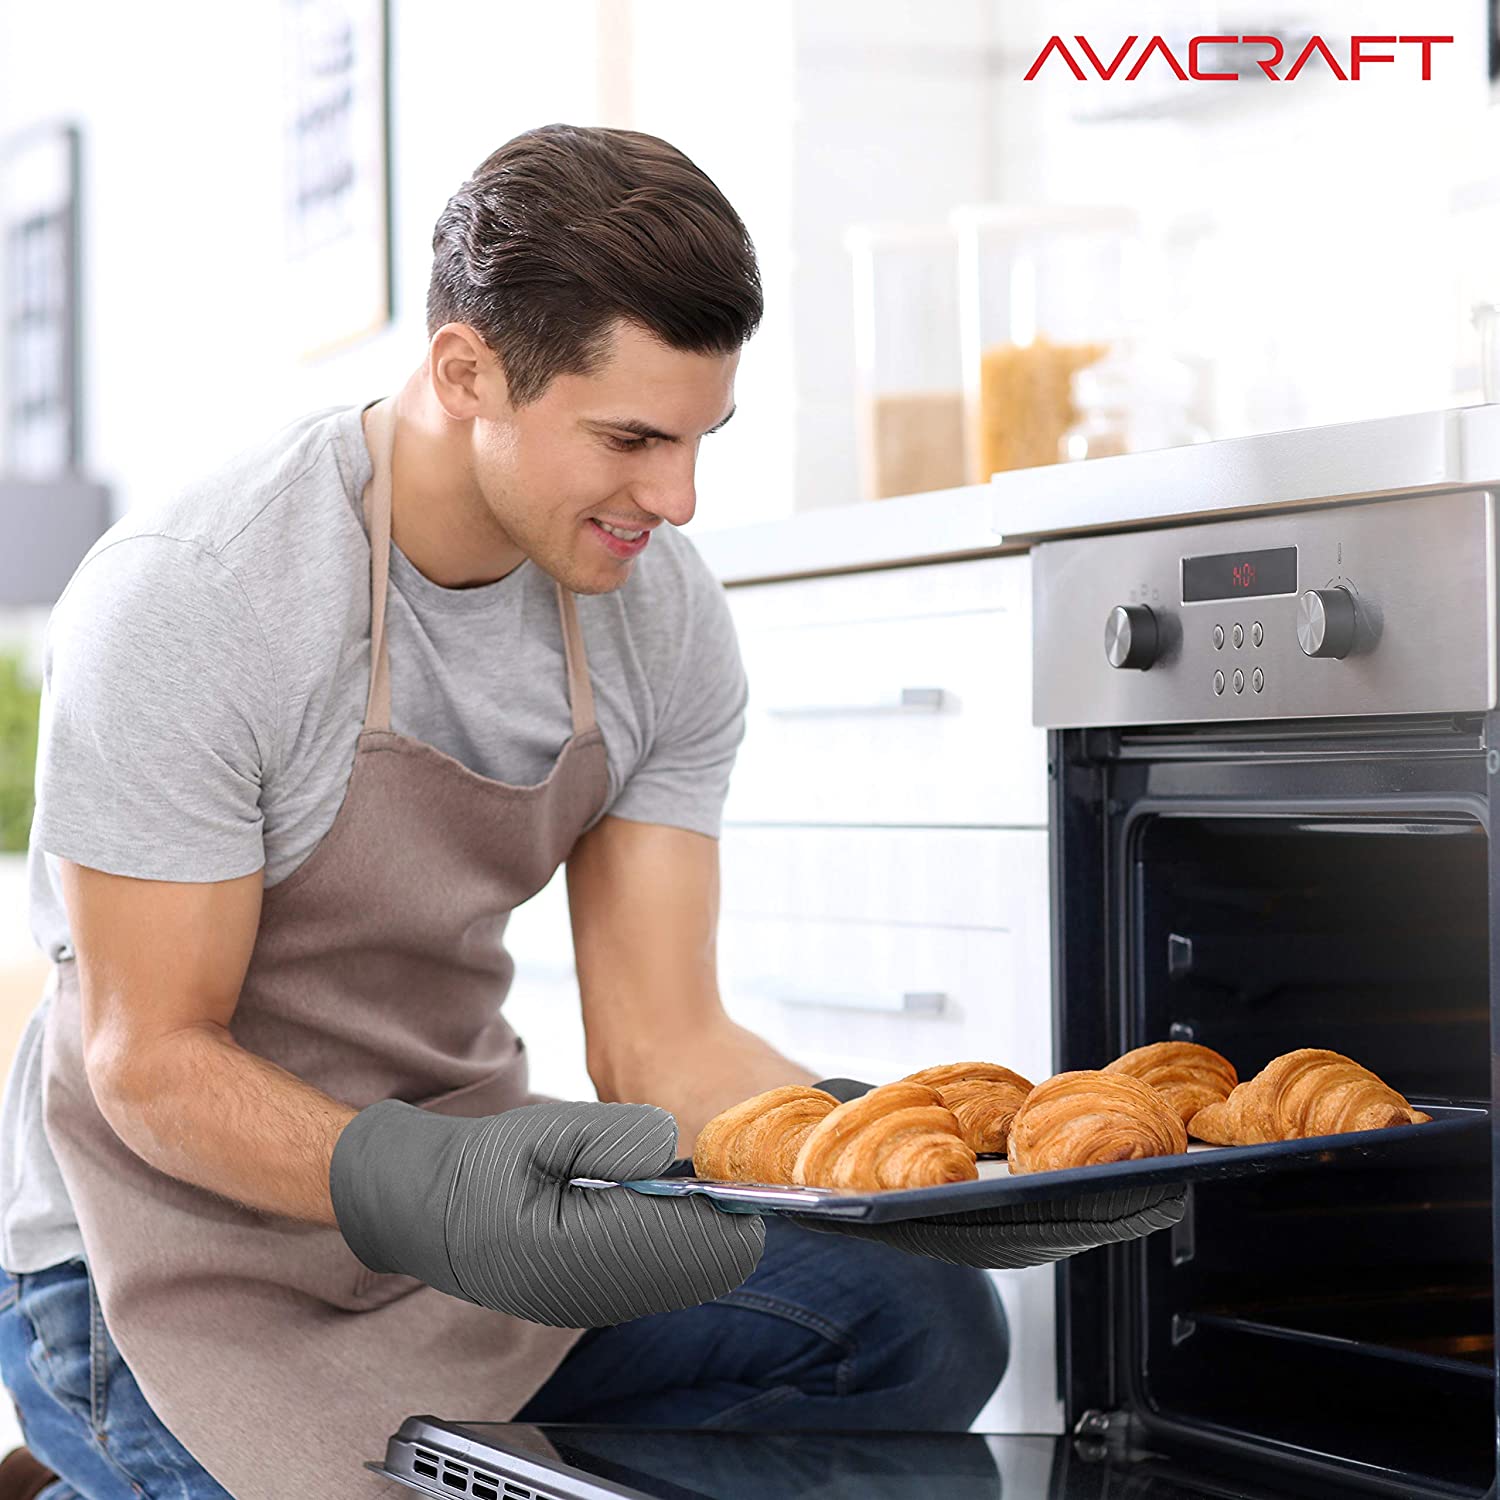 Beautifully Made Calphalon Oven Mitts For Kitchen Safety 